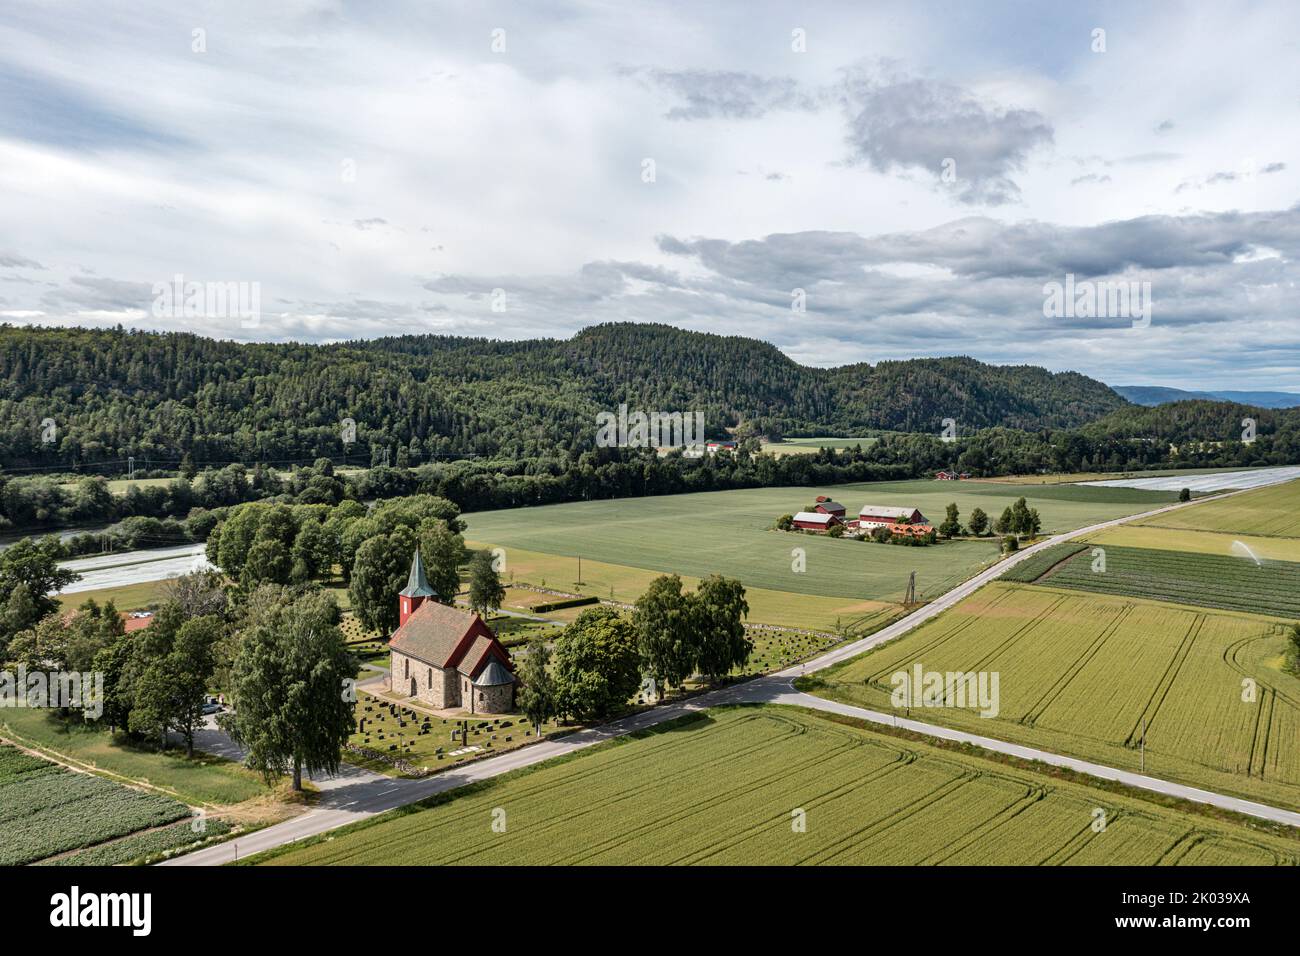 Norway, Vestfold, Larvik, Hedrum, church, road, fields, mountains, overview, aerial photo Stock Photo